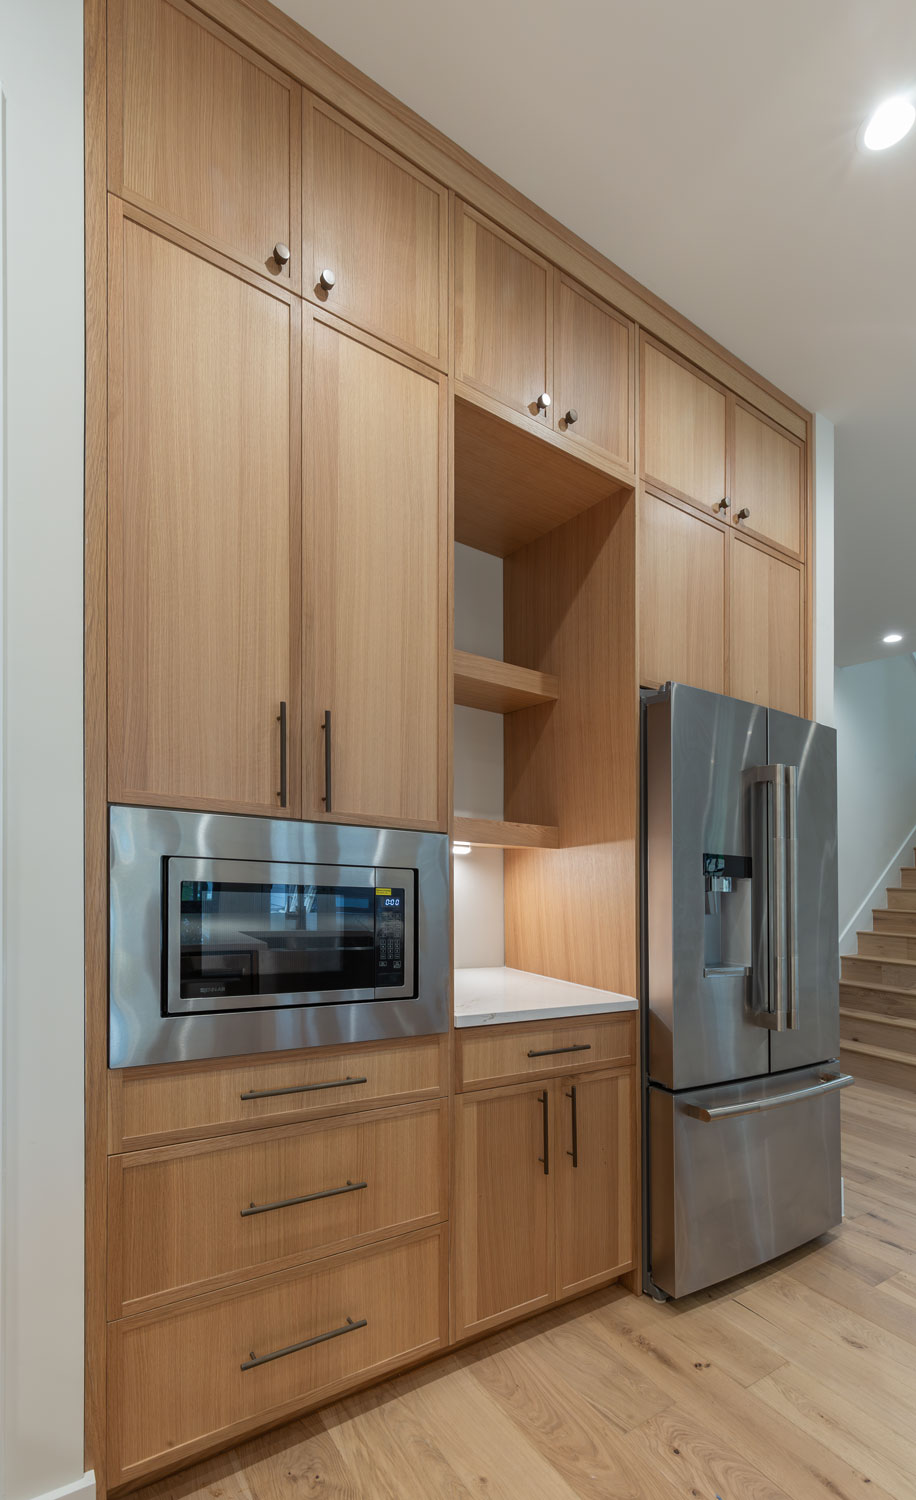 Wall cabinets in rift white oak with 4S 1" Shaker cabinet doors and floating shelf